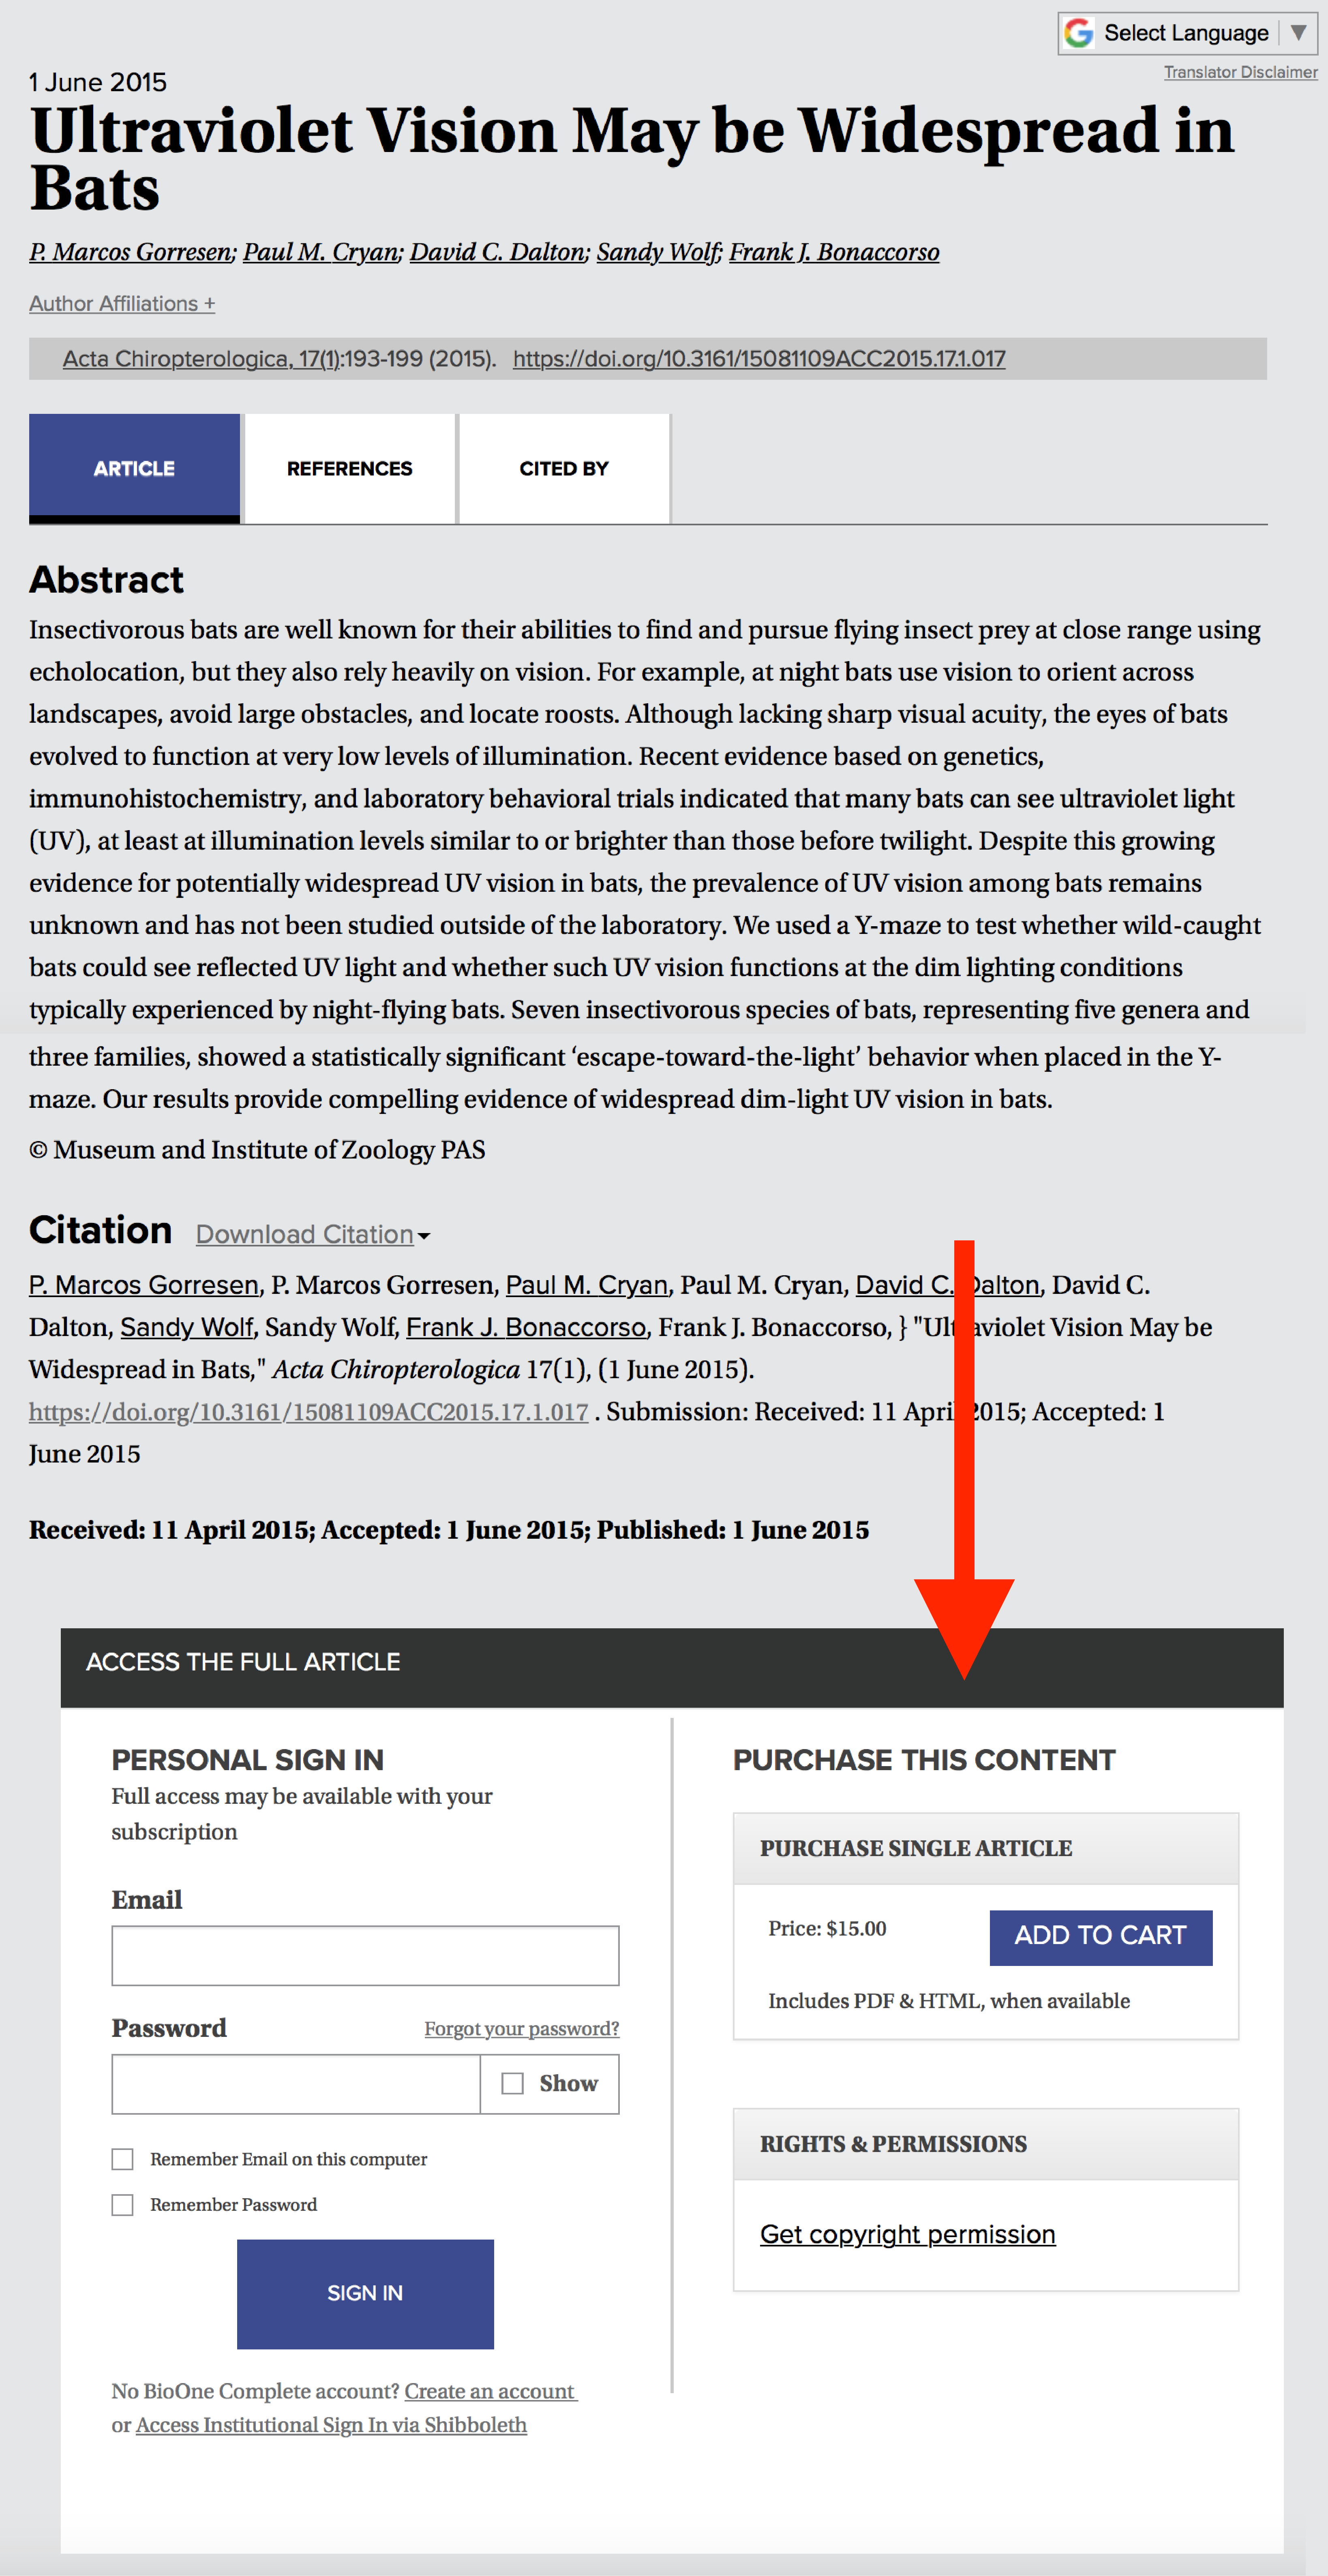 A screenshot of an article page with a red arrow indicating the Purchase Article option.